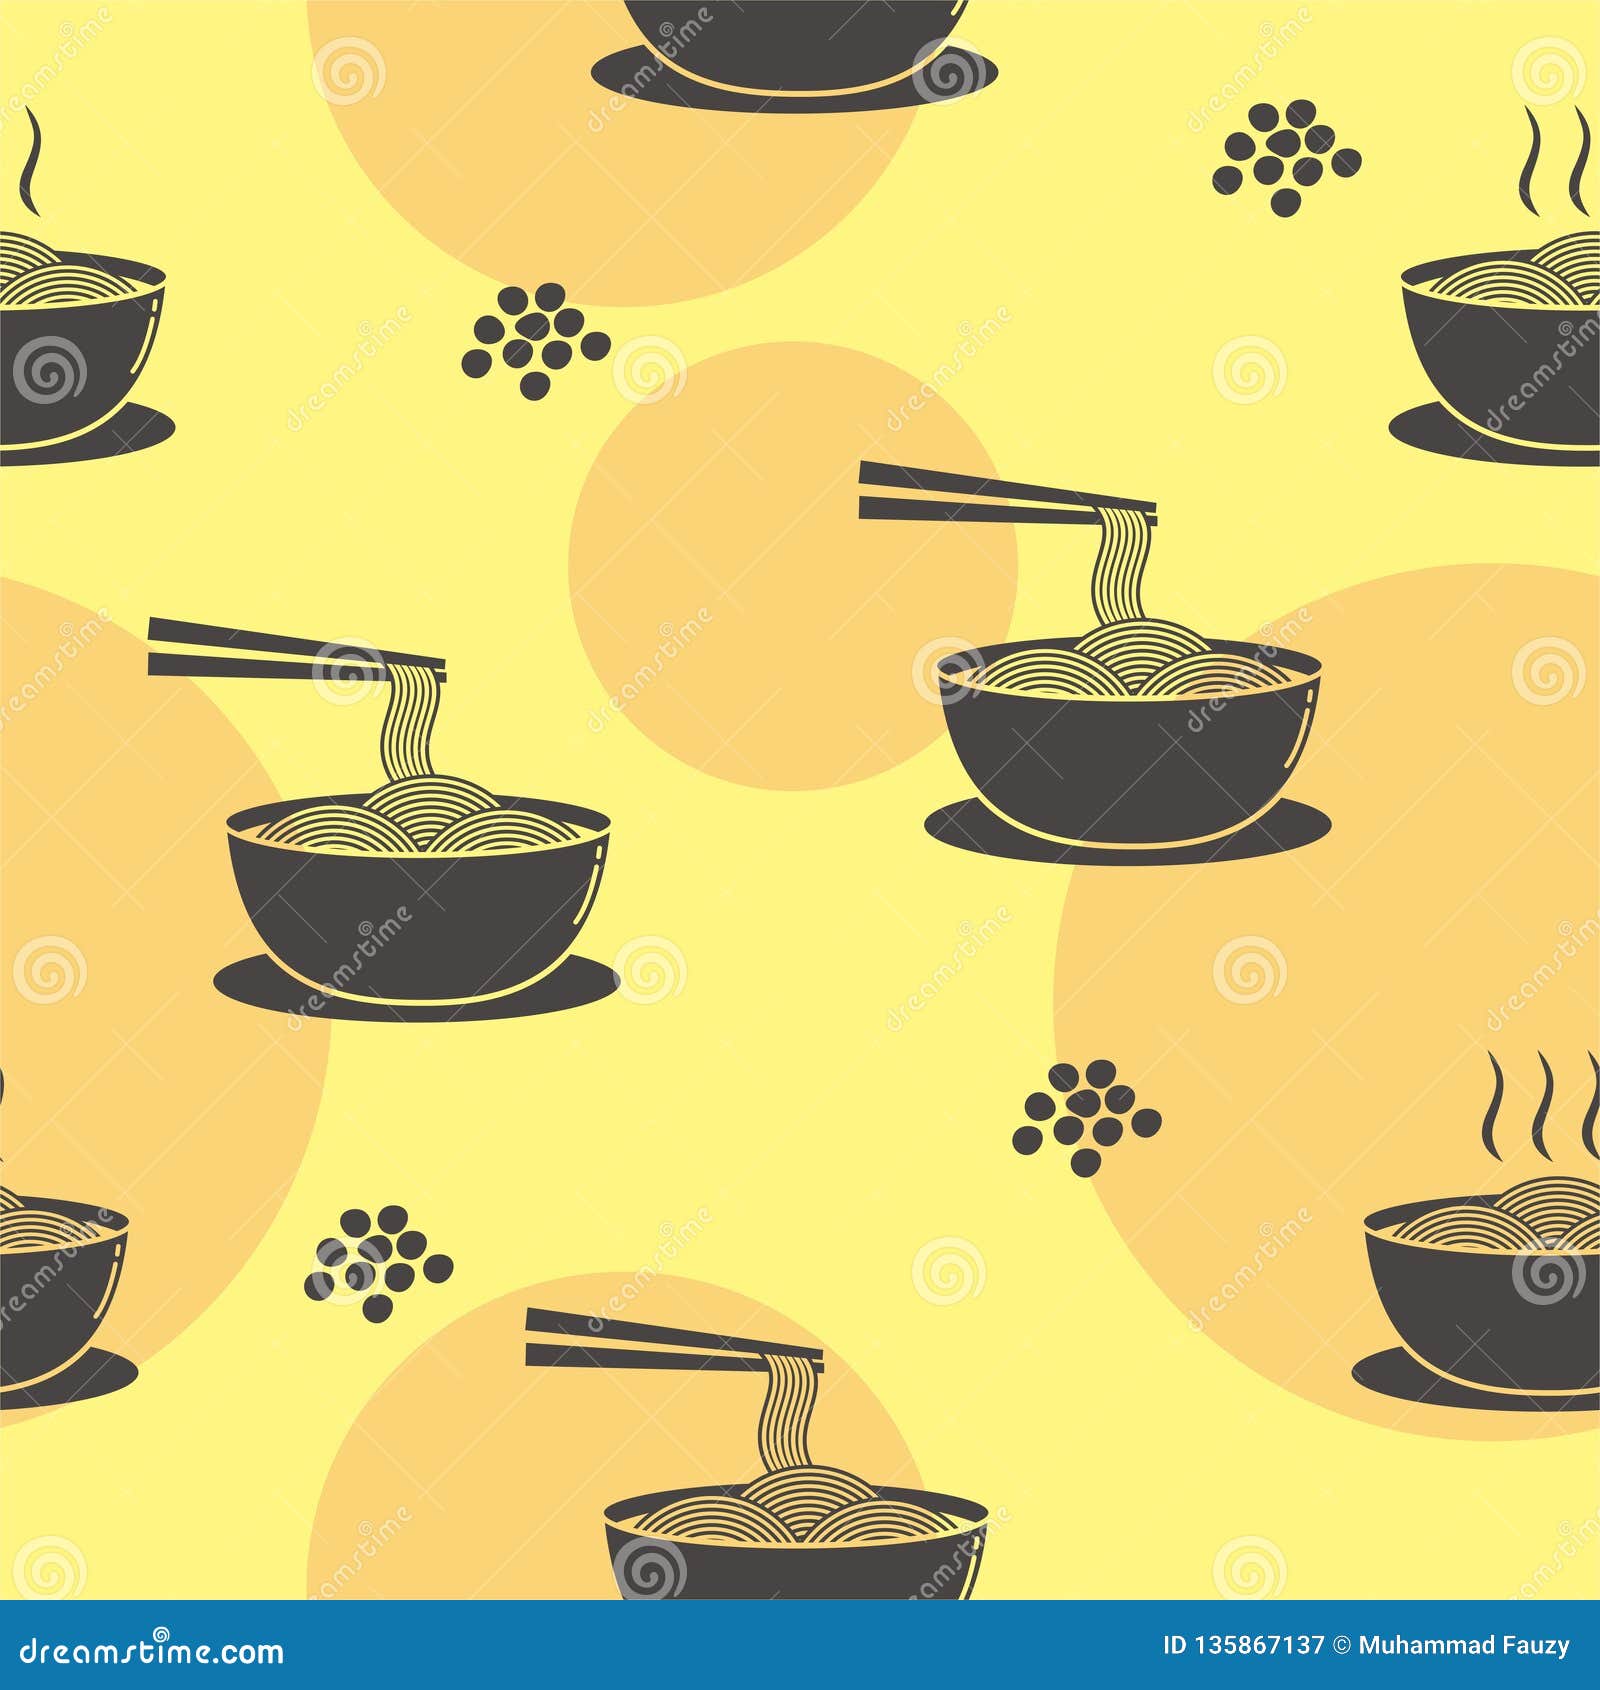 Download Noodle In Bowl Seamless Pattern With Yellow Color Stock Vector Illustration Of Delicious Asia 135867137 Yellowimages Mockups